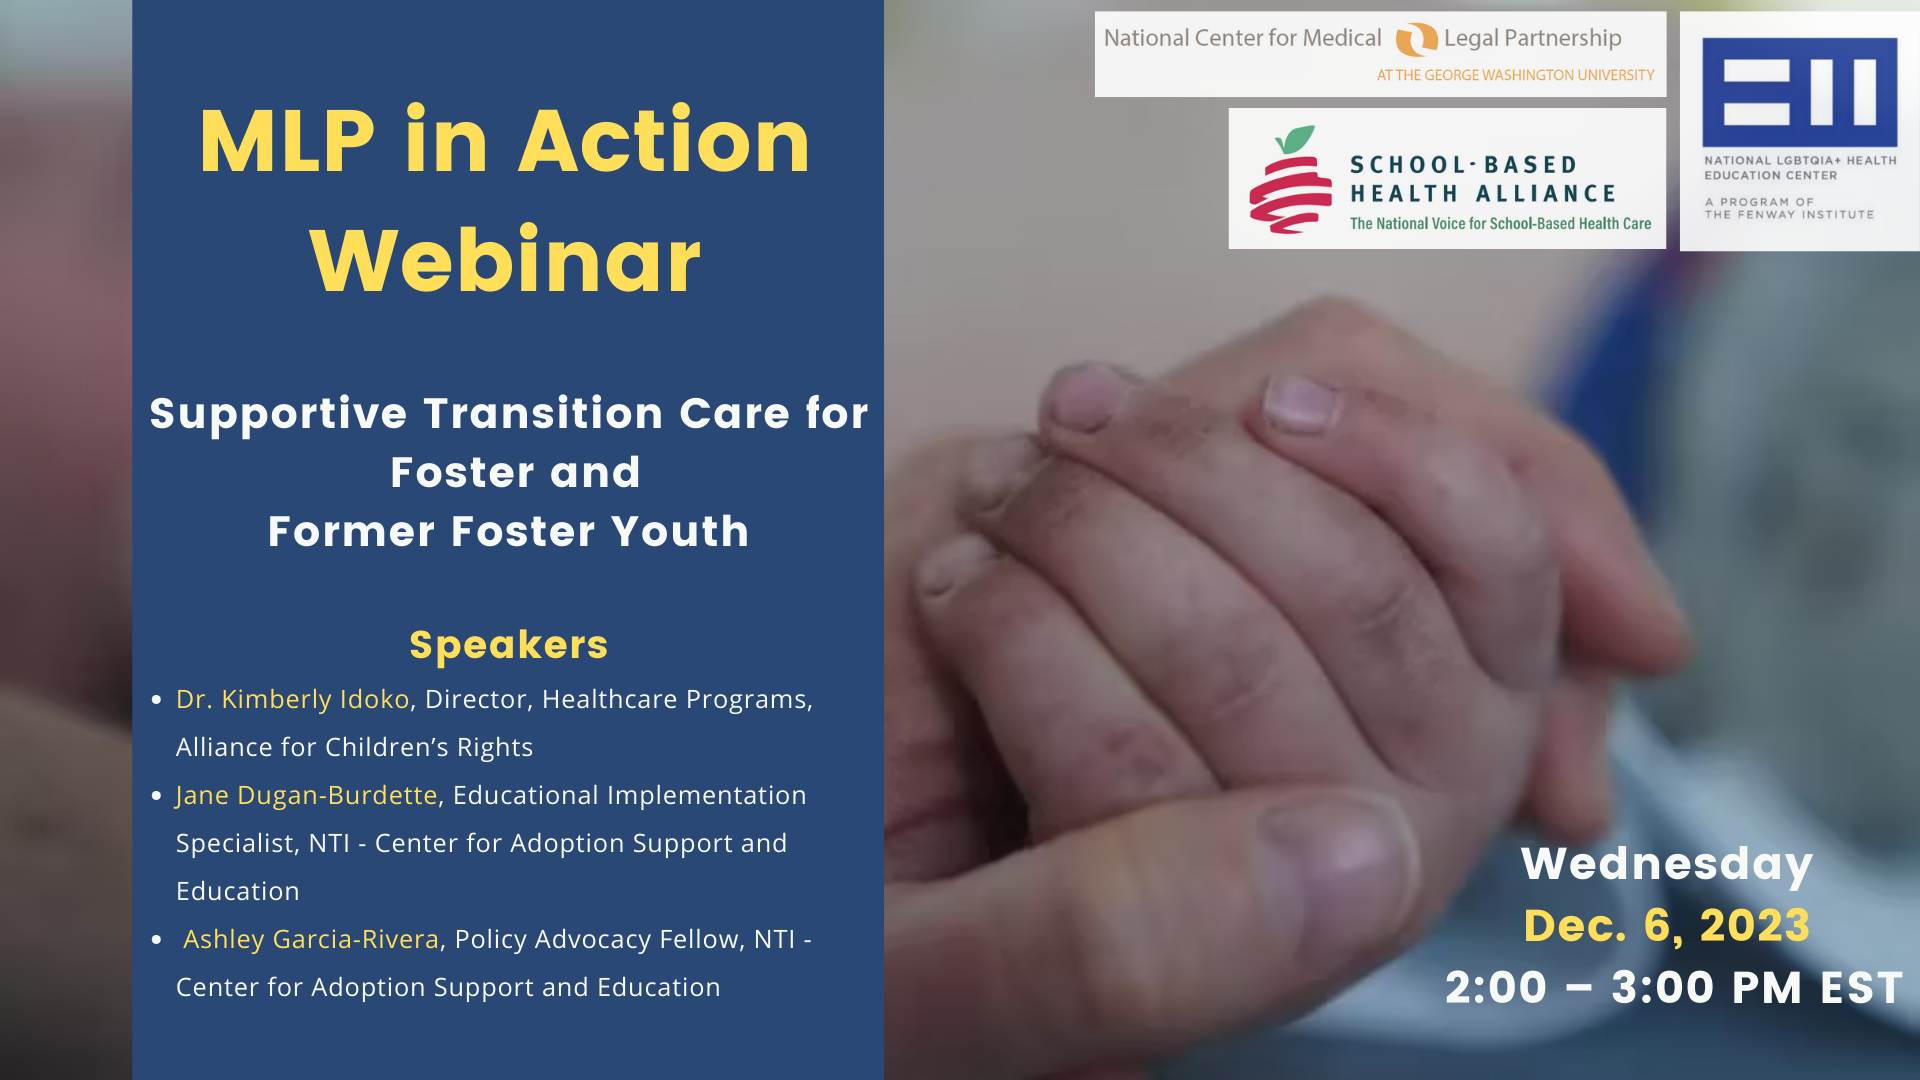 Upcoming Webinar: Supportive Transition Care for Foster and Former Foster Youth